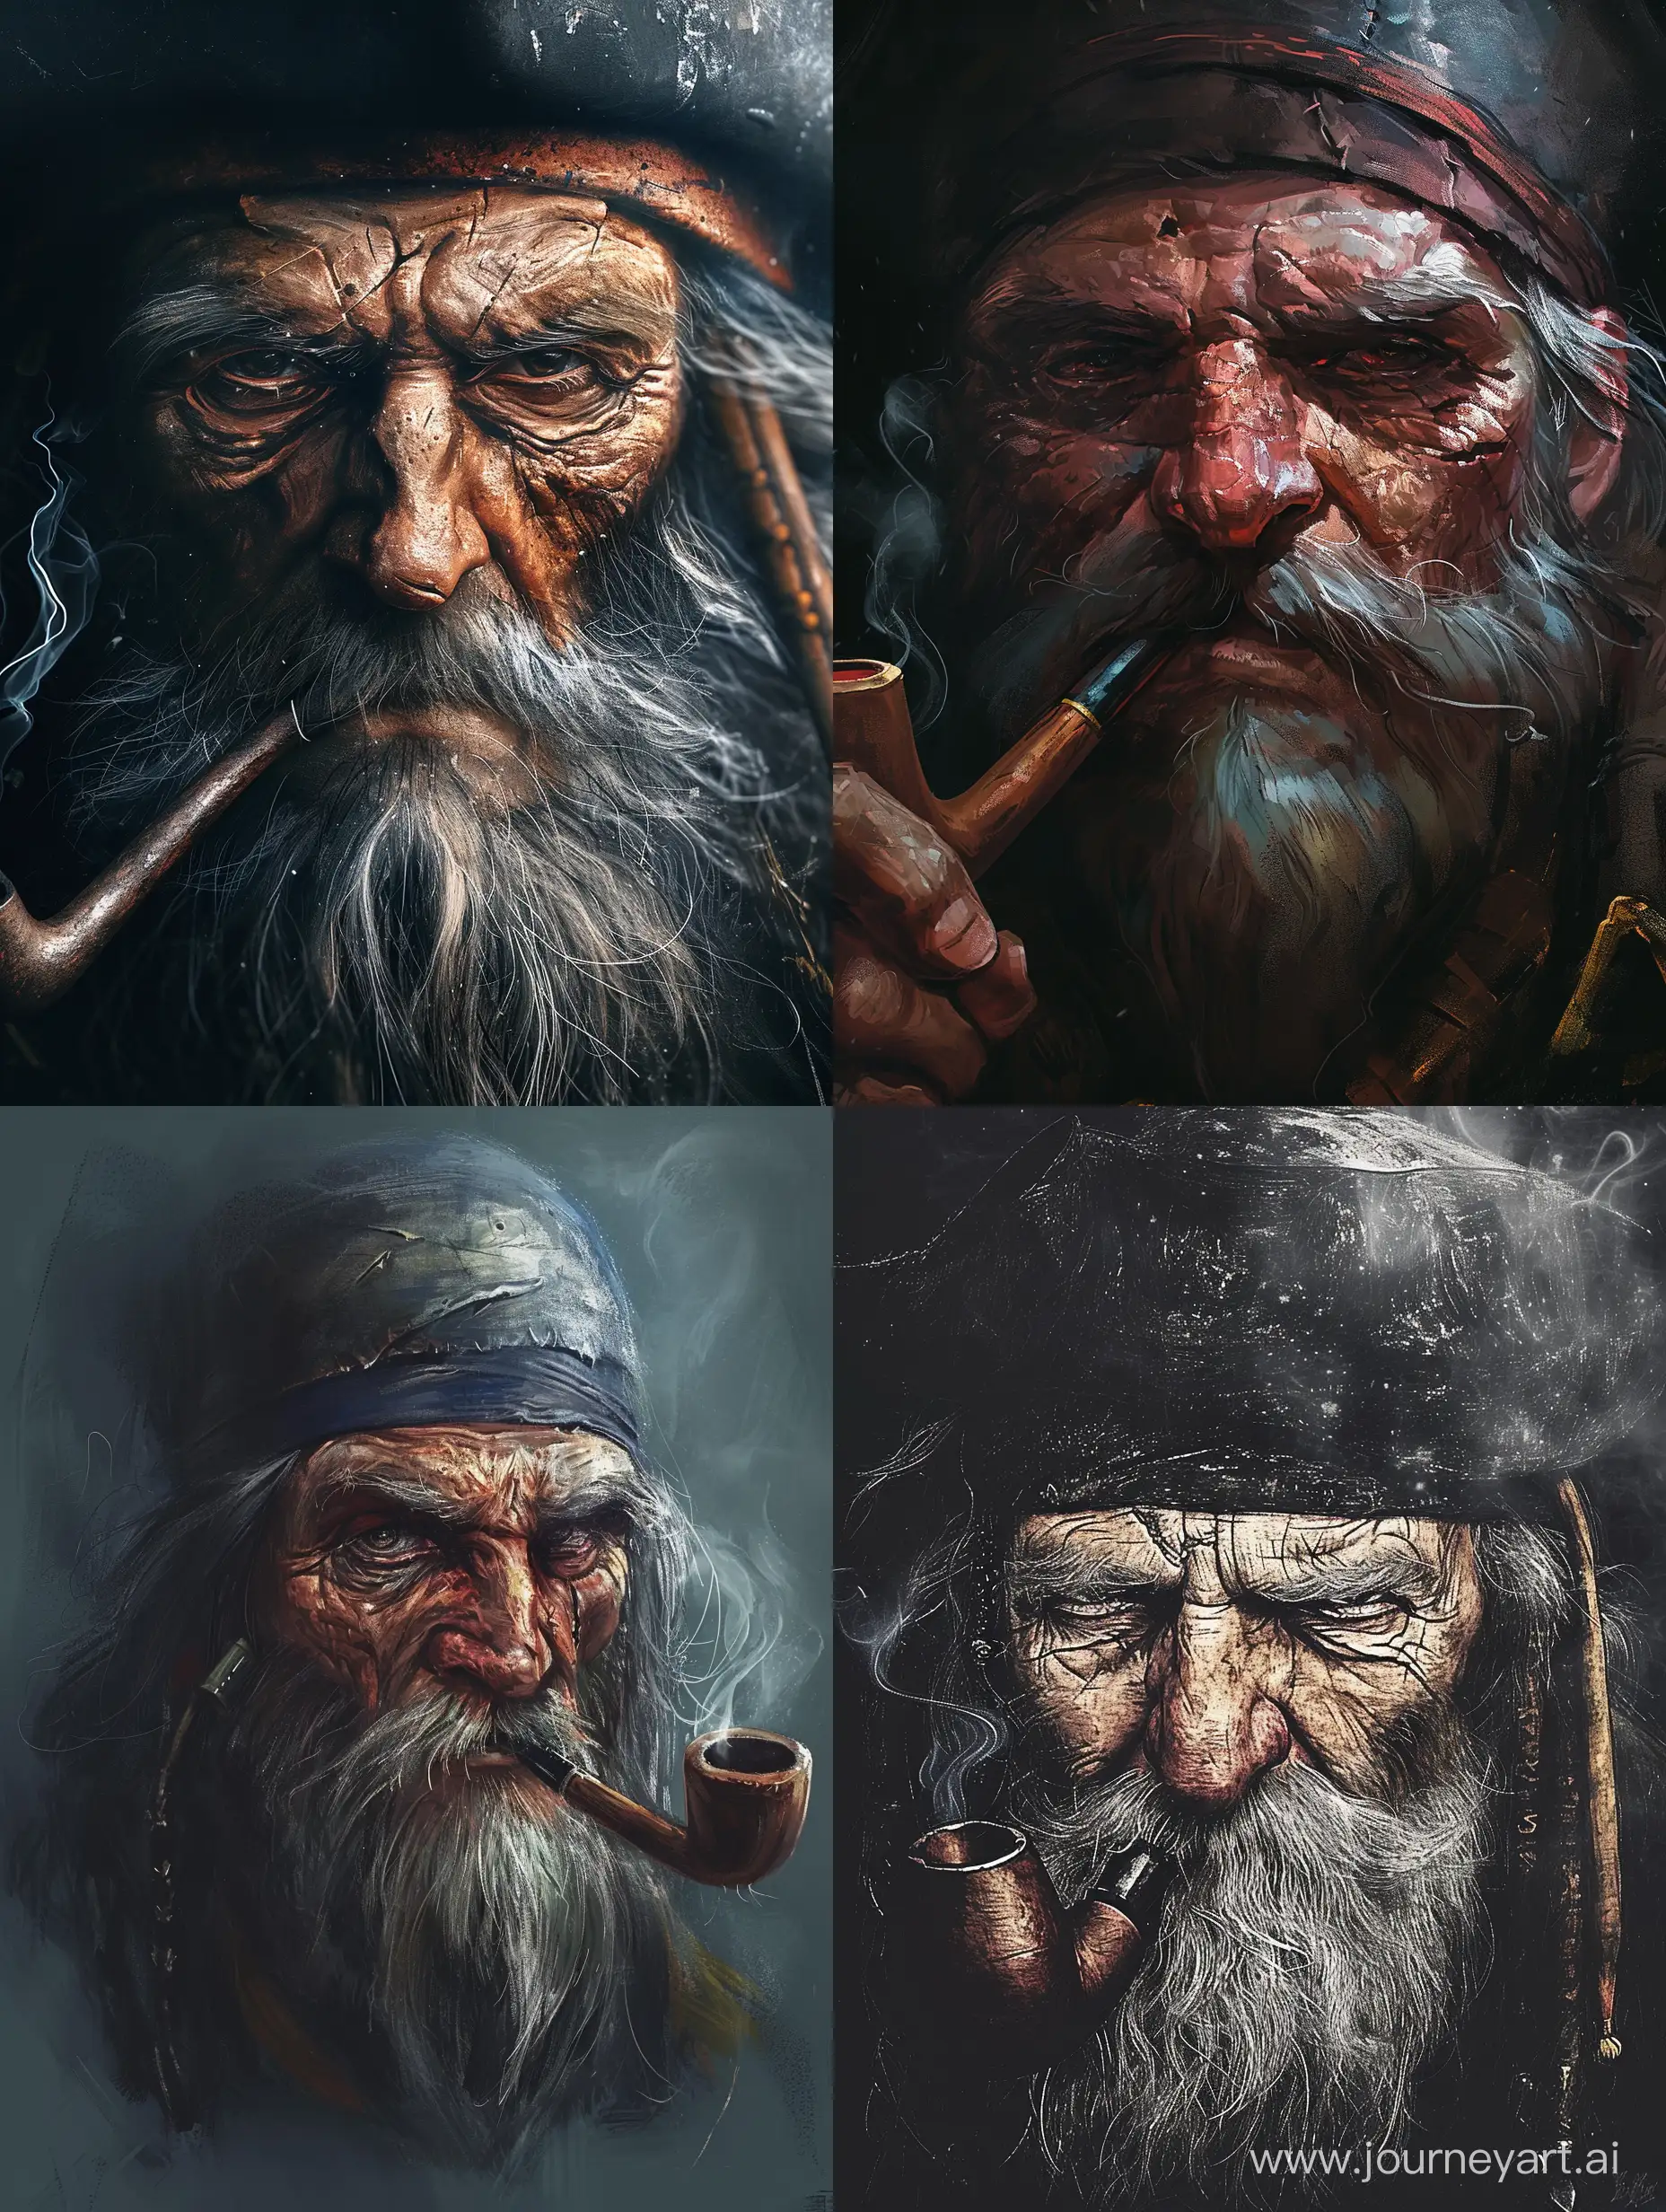 Draw pirate captain Greybeard. Using realistic engine. Only draw headshot. 3/4 view. He is smoking pipe. He is old with crinkles showing around eyes and face. --v 6 --ar 3:4